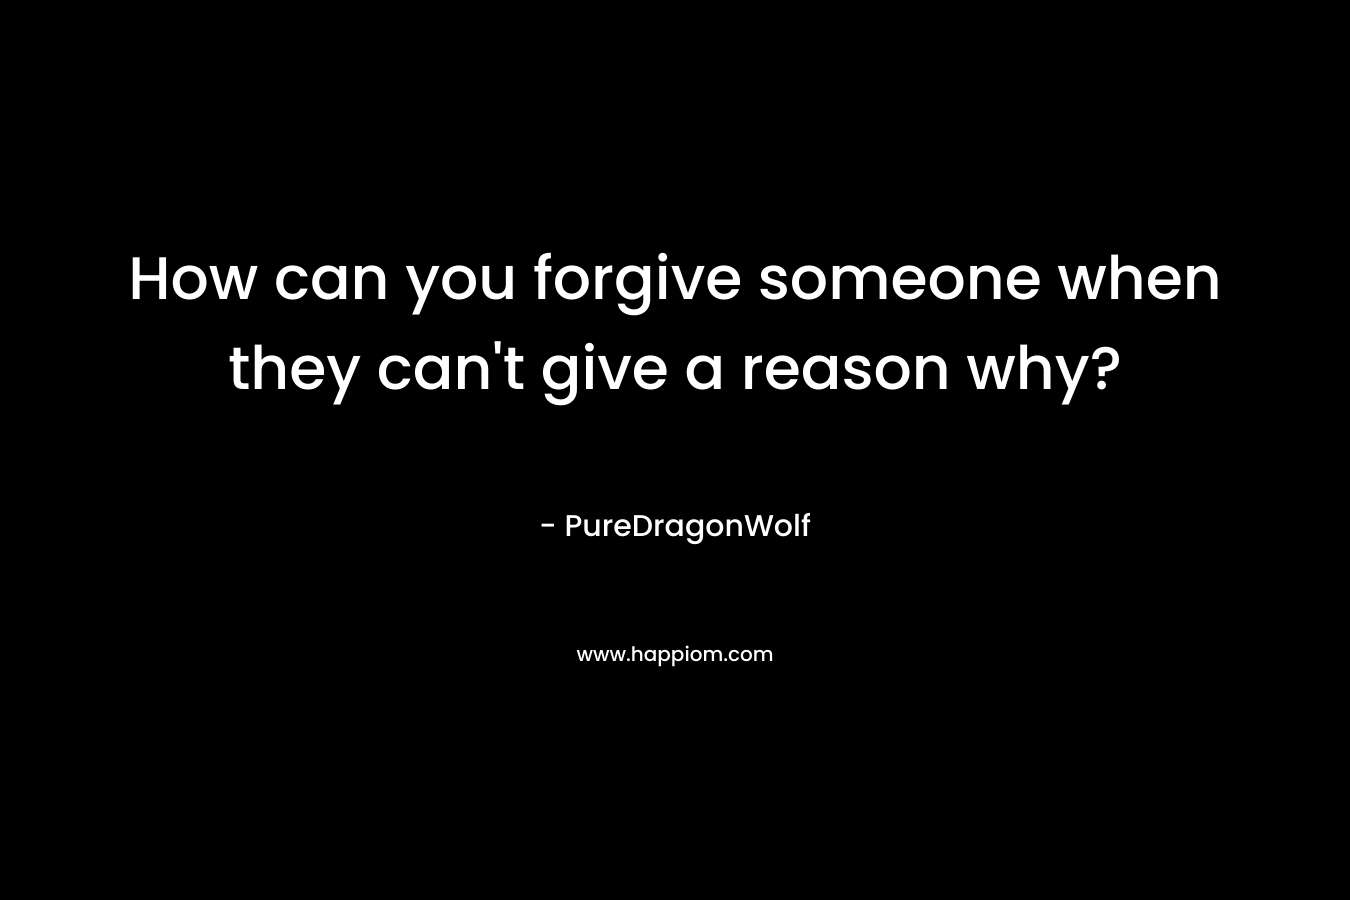 How can you forgive someone when they can’t give a reason why? – PureDragonWolf